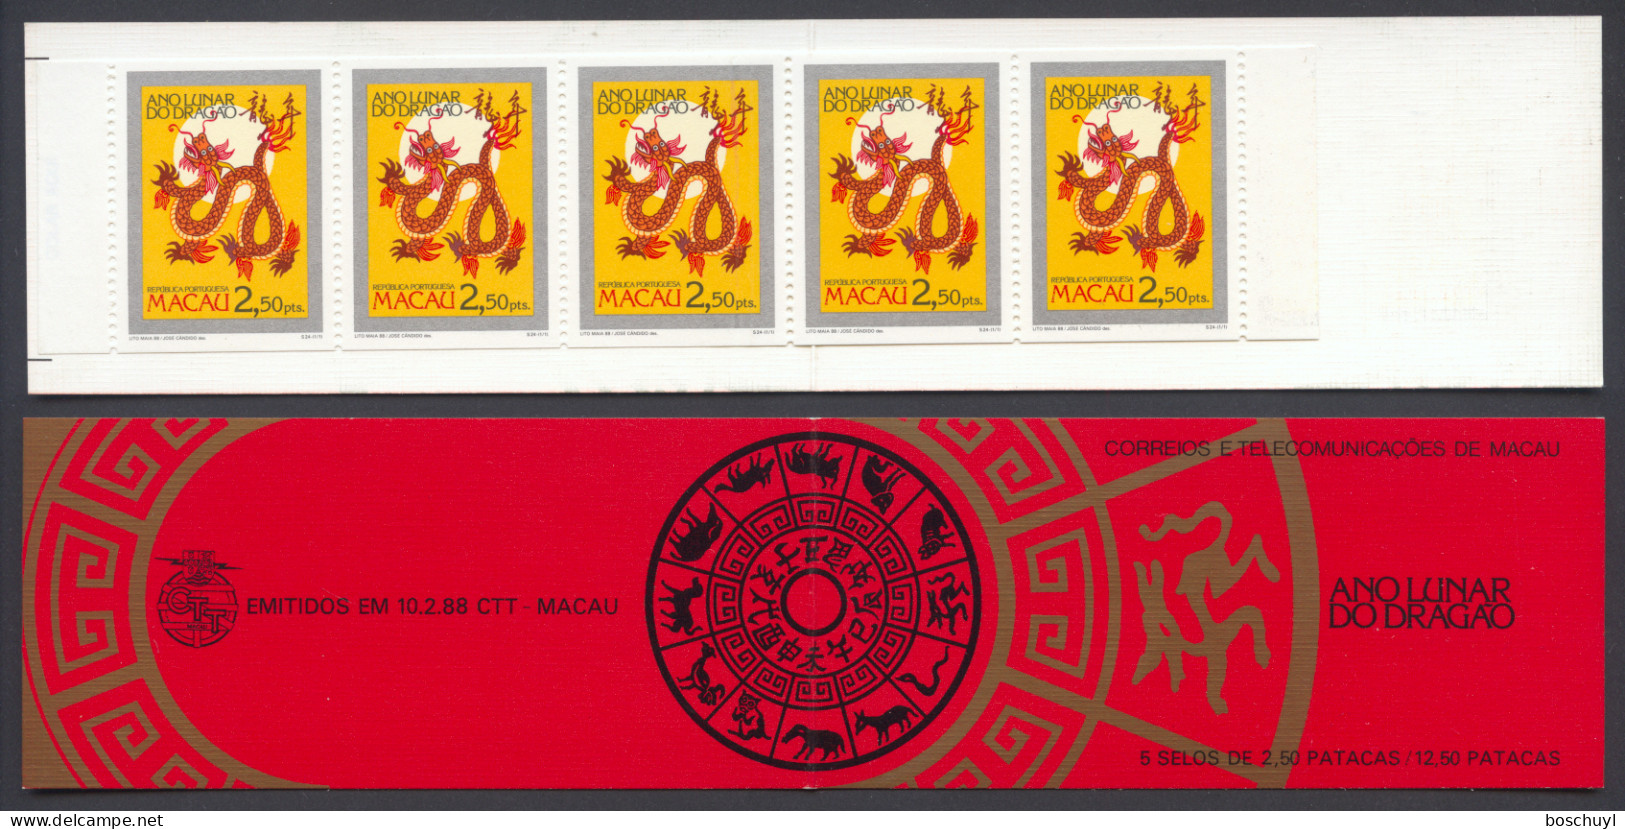 Macau, 1988, Year Of The Dragon, Chinese New Year, MNH Booklet, Michel MH 588C - Cuadernillos